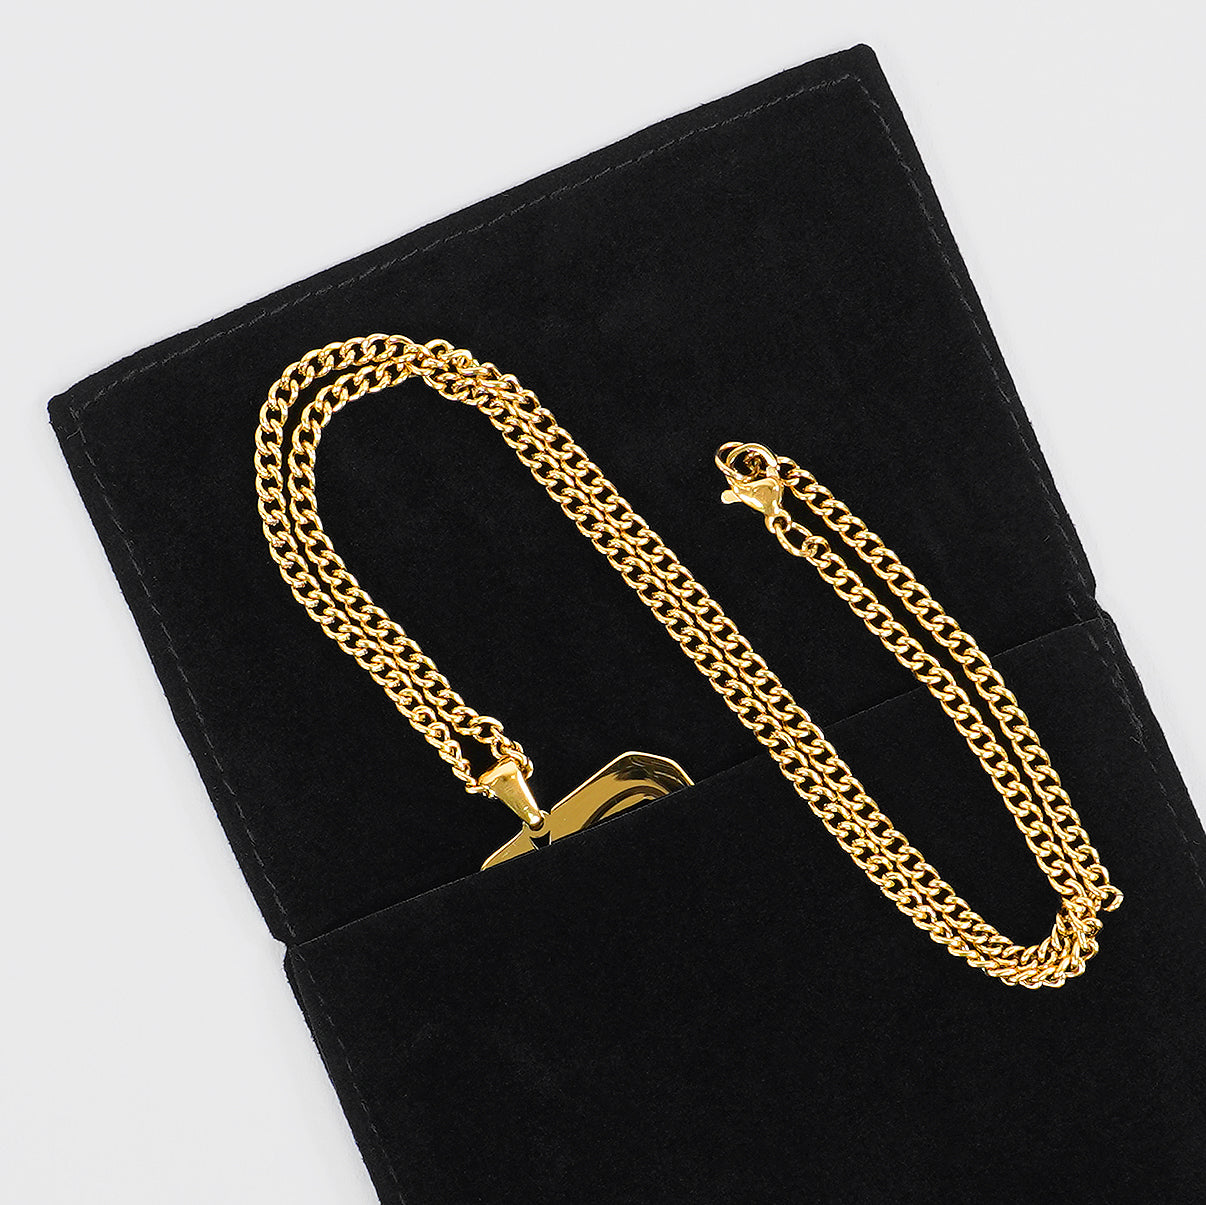 3 Number Pendant with Chain Necklace - Gold Plated Stainless Steel